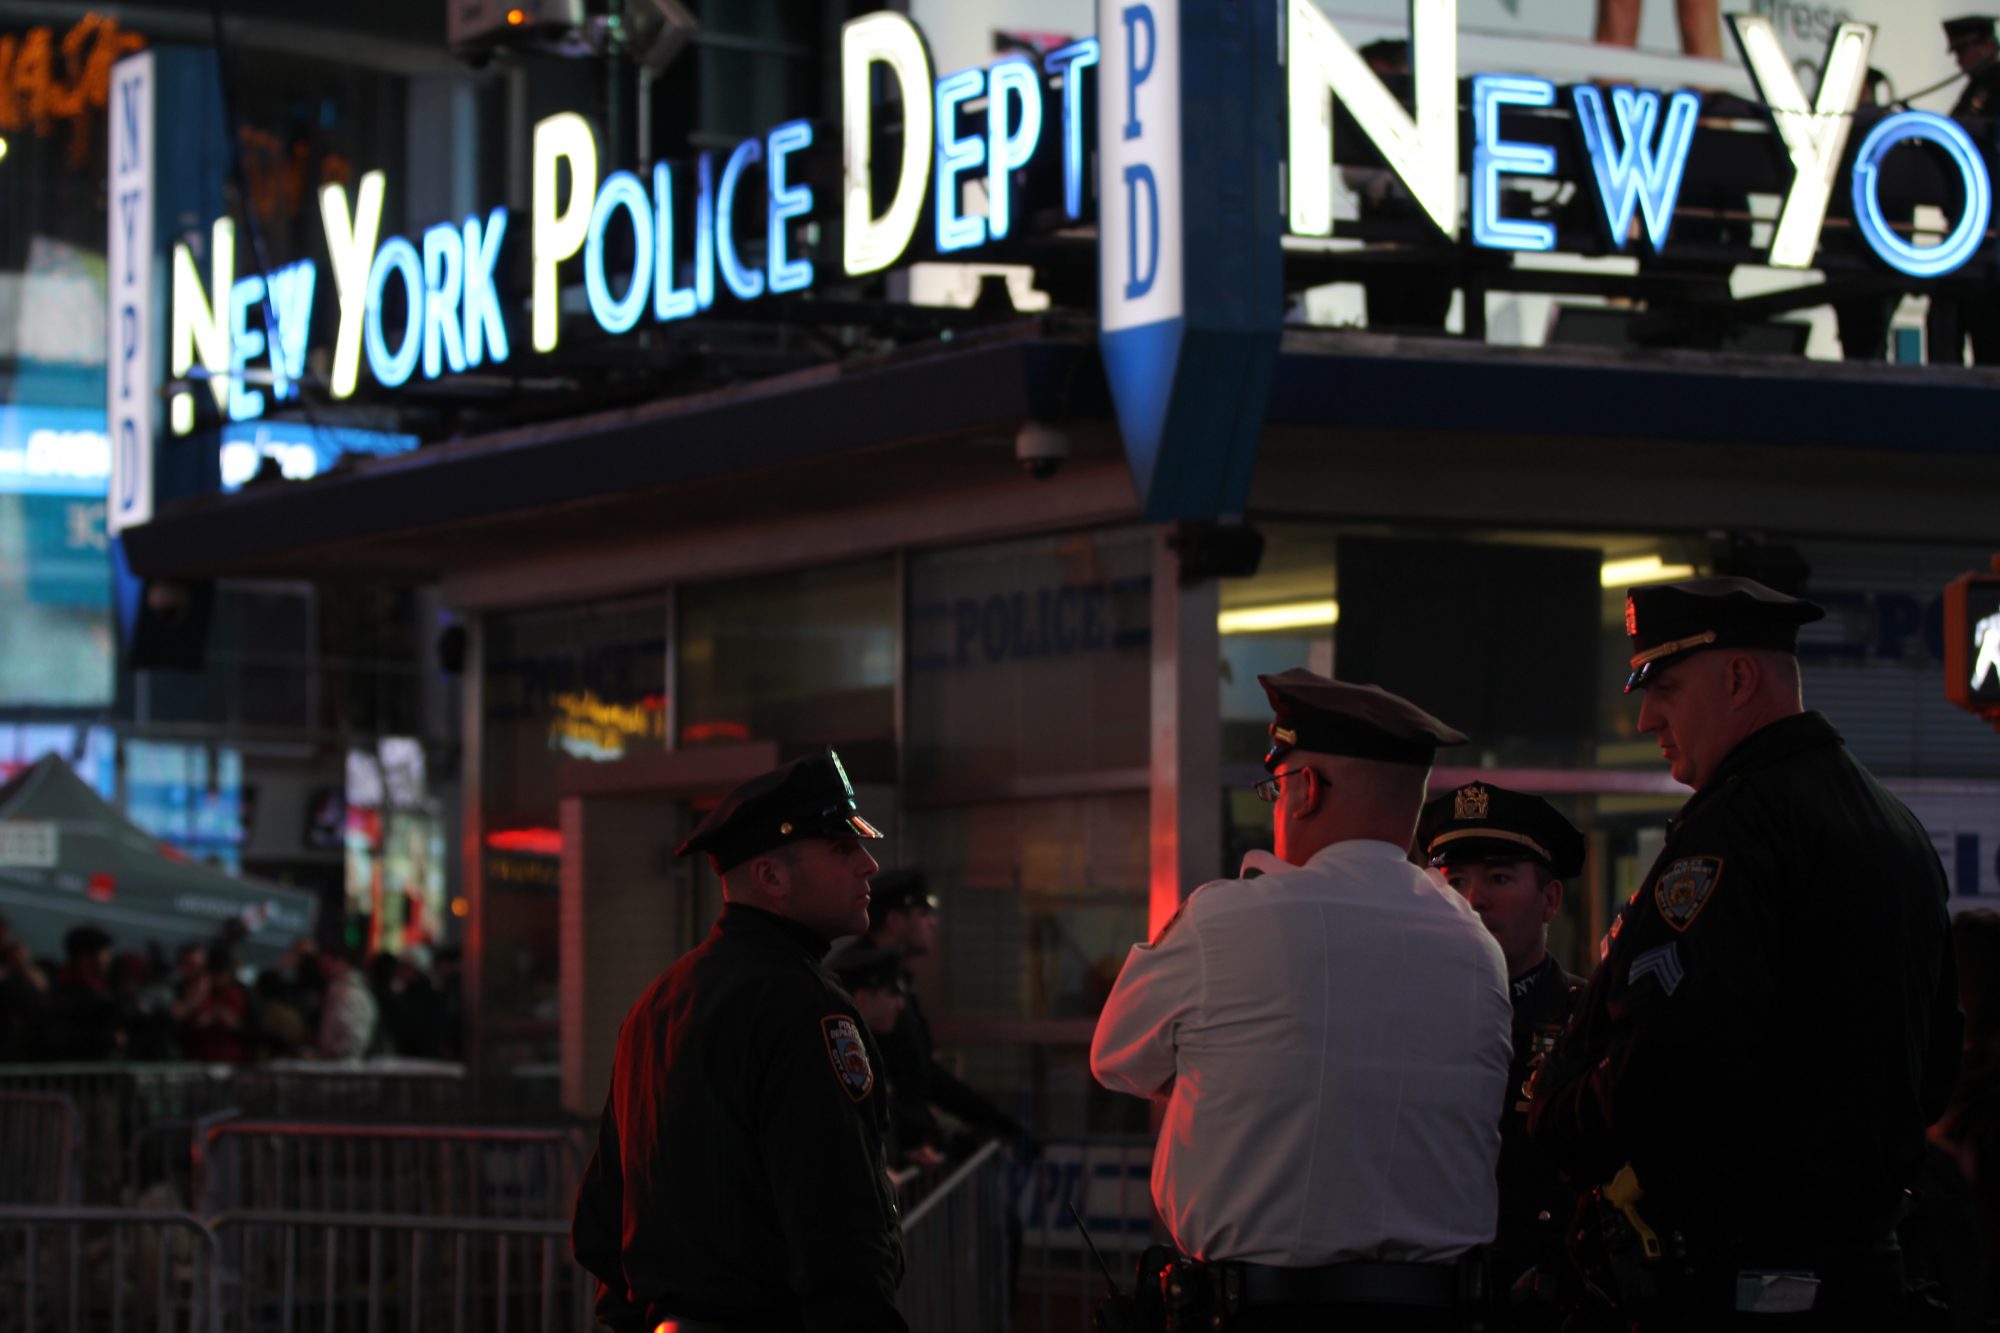 New York Police Department officers line the streets to keep the peace and control foot traffic. (Rishika Dugyala/MNS)